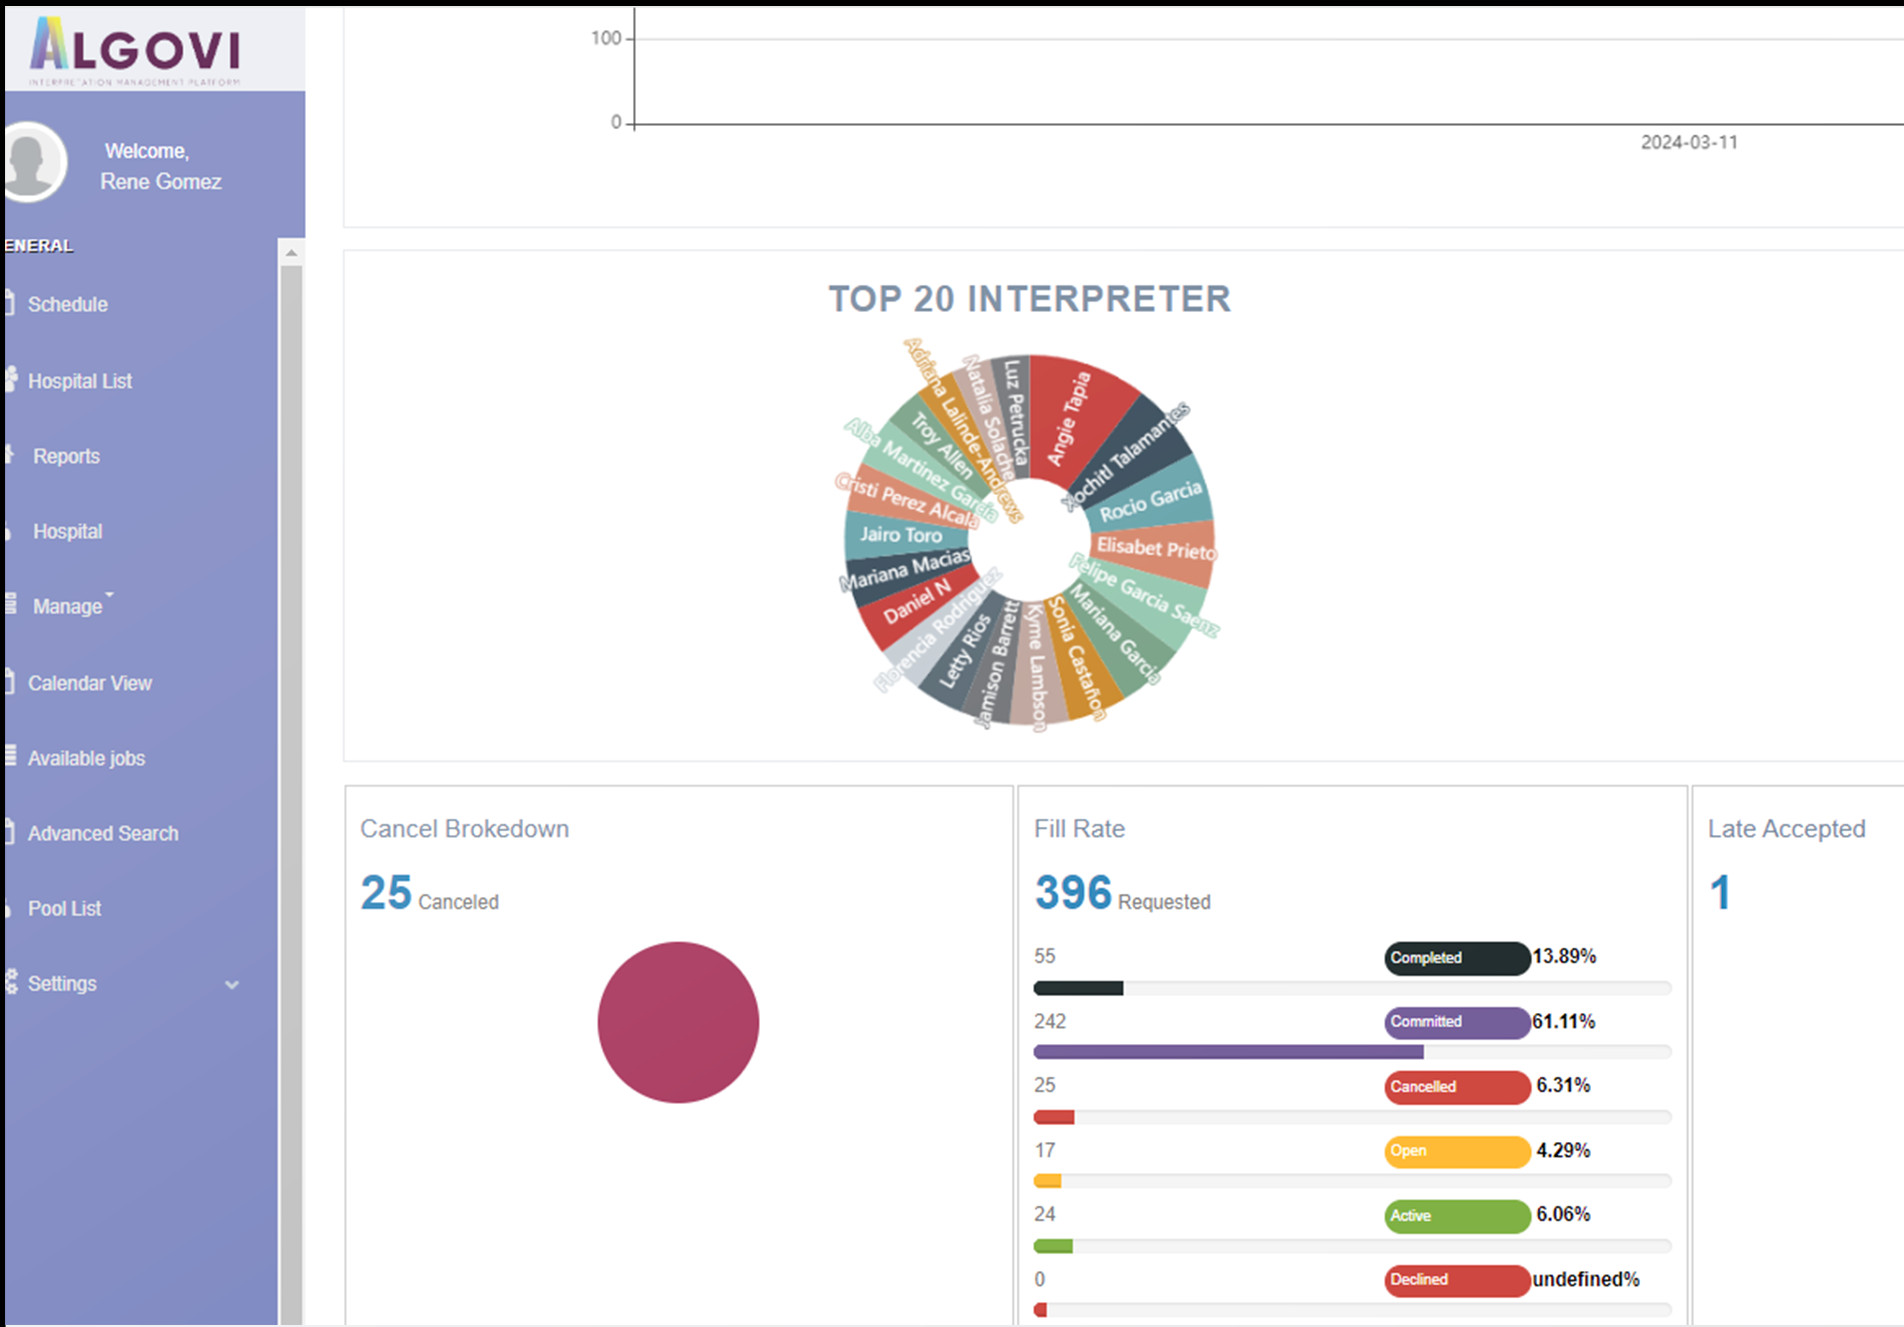 Screenshot of a business dashboard from "algovvi" showing a colorful pie chart labeled "top 20 interpreter", a bar graph of call breakdown, and various call stats, with a focus on resolved, cancelled, and accepted calls.